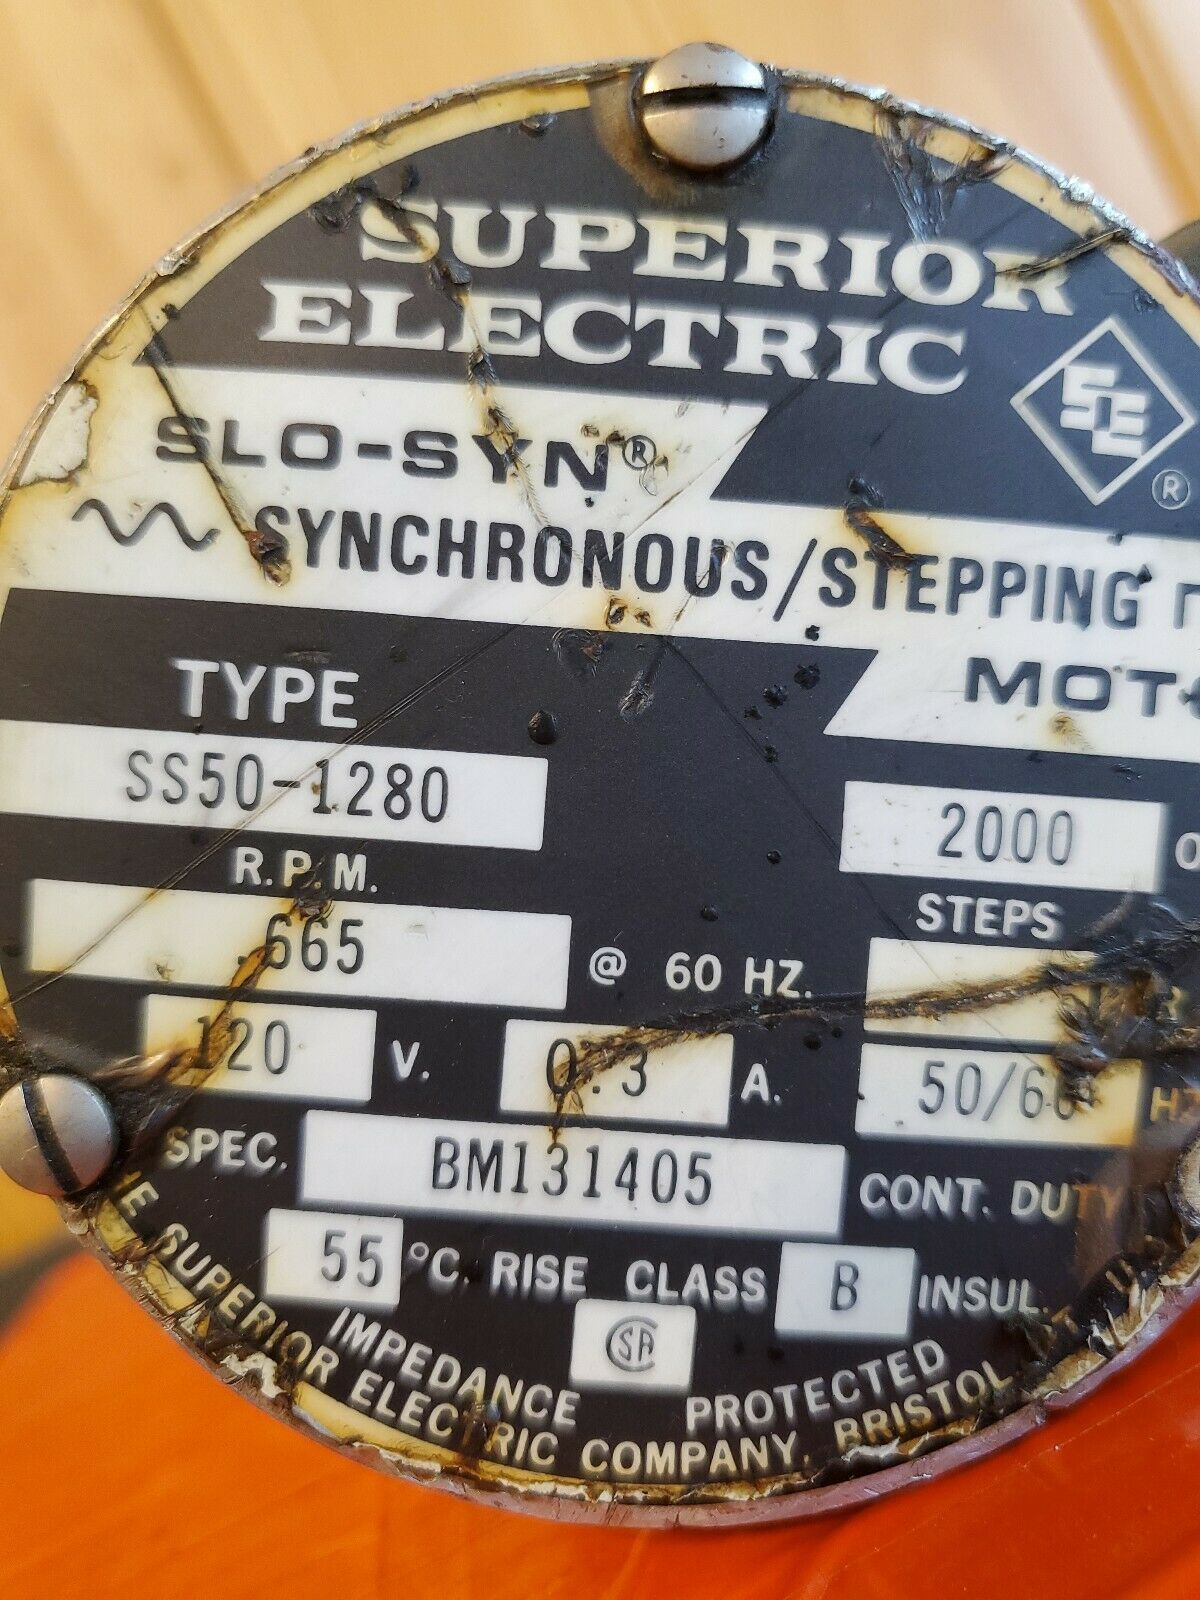 Details about   Superior Electric Slo-Syn Motor SS50-1280 RPM .665 120v Synchronous Stepping 